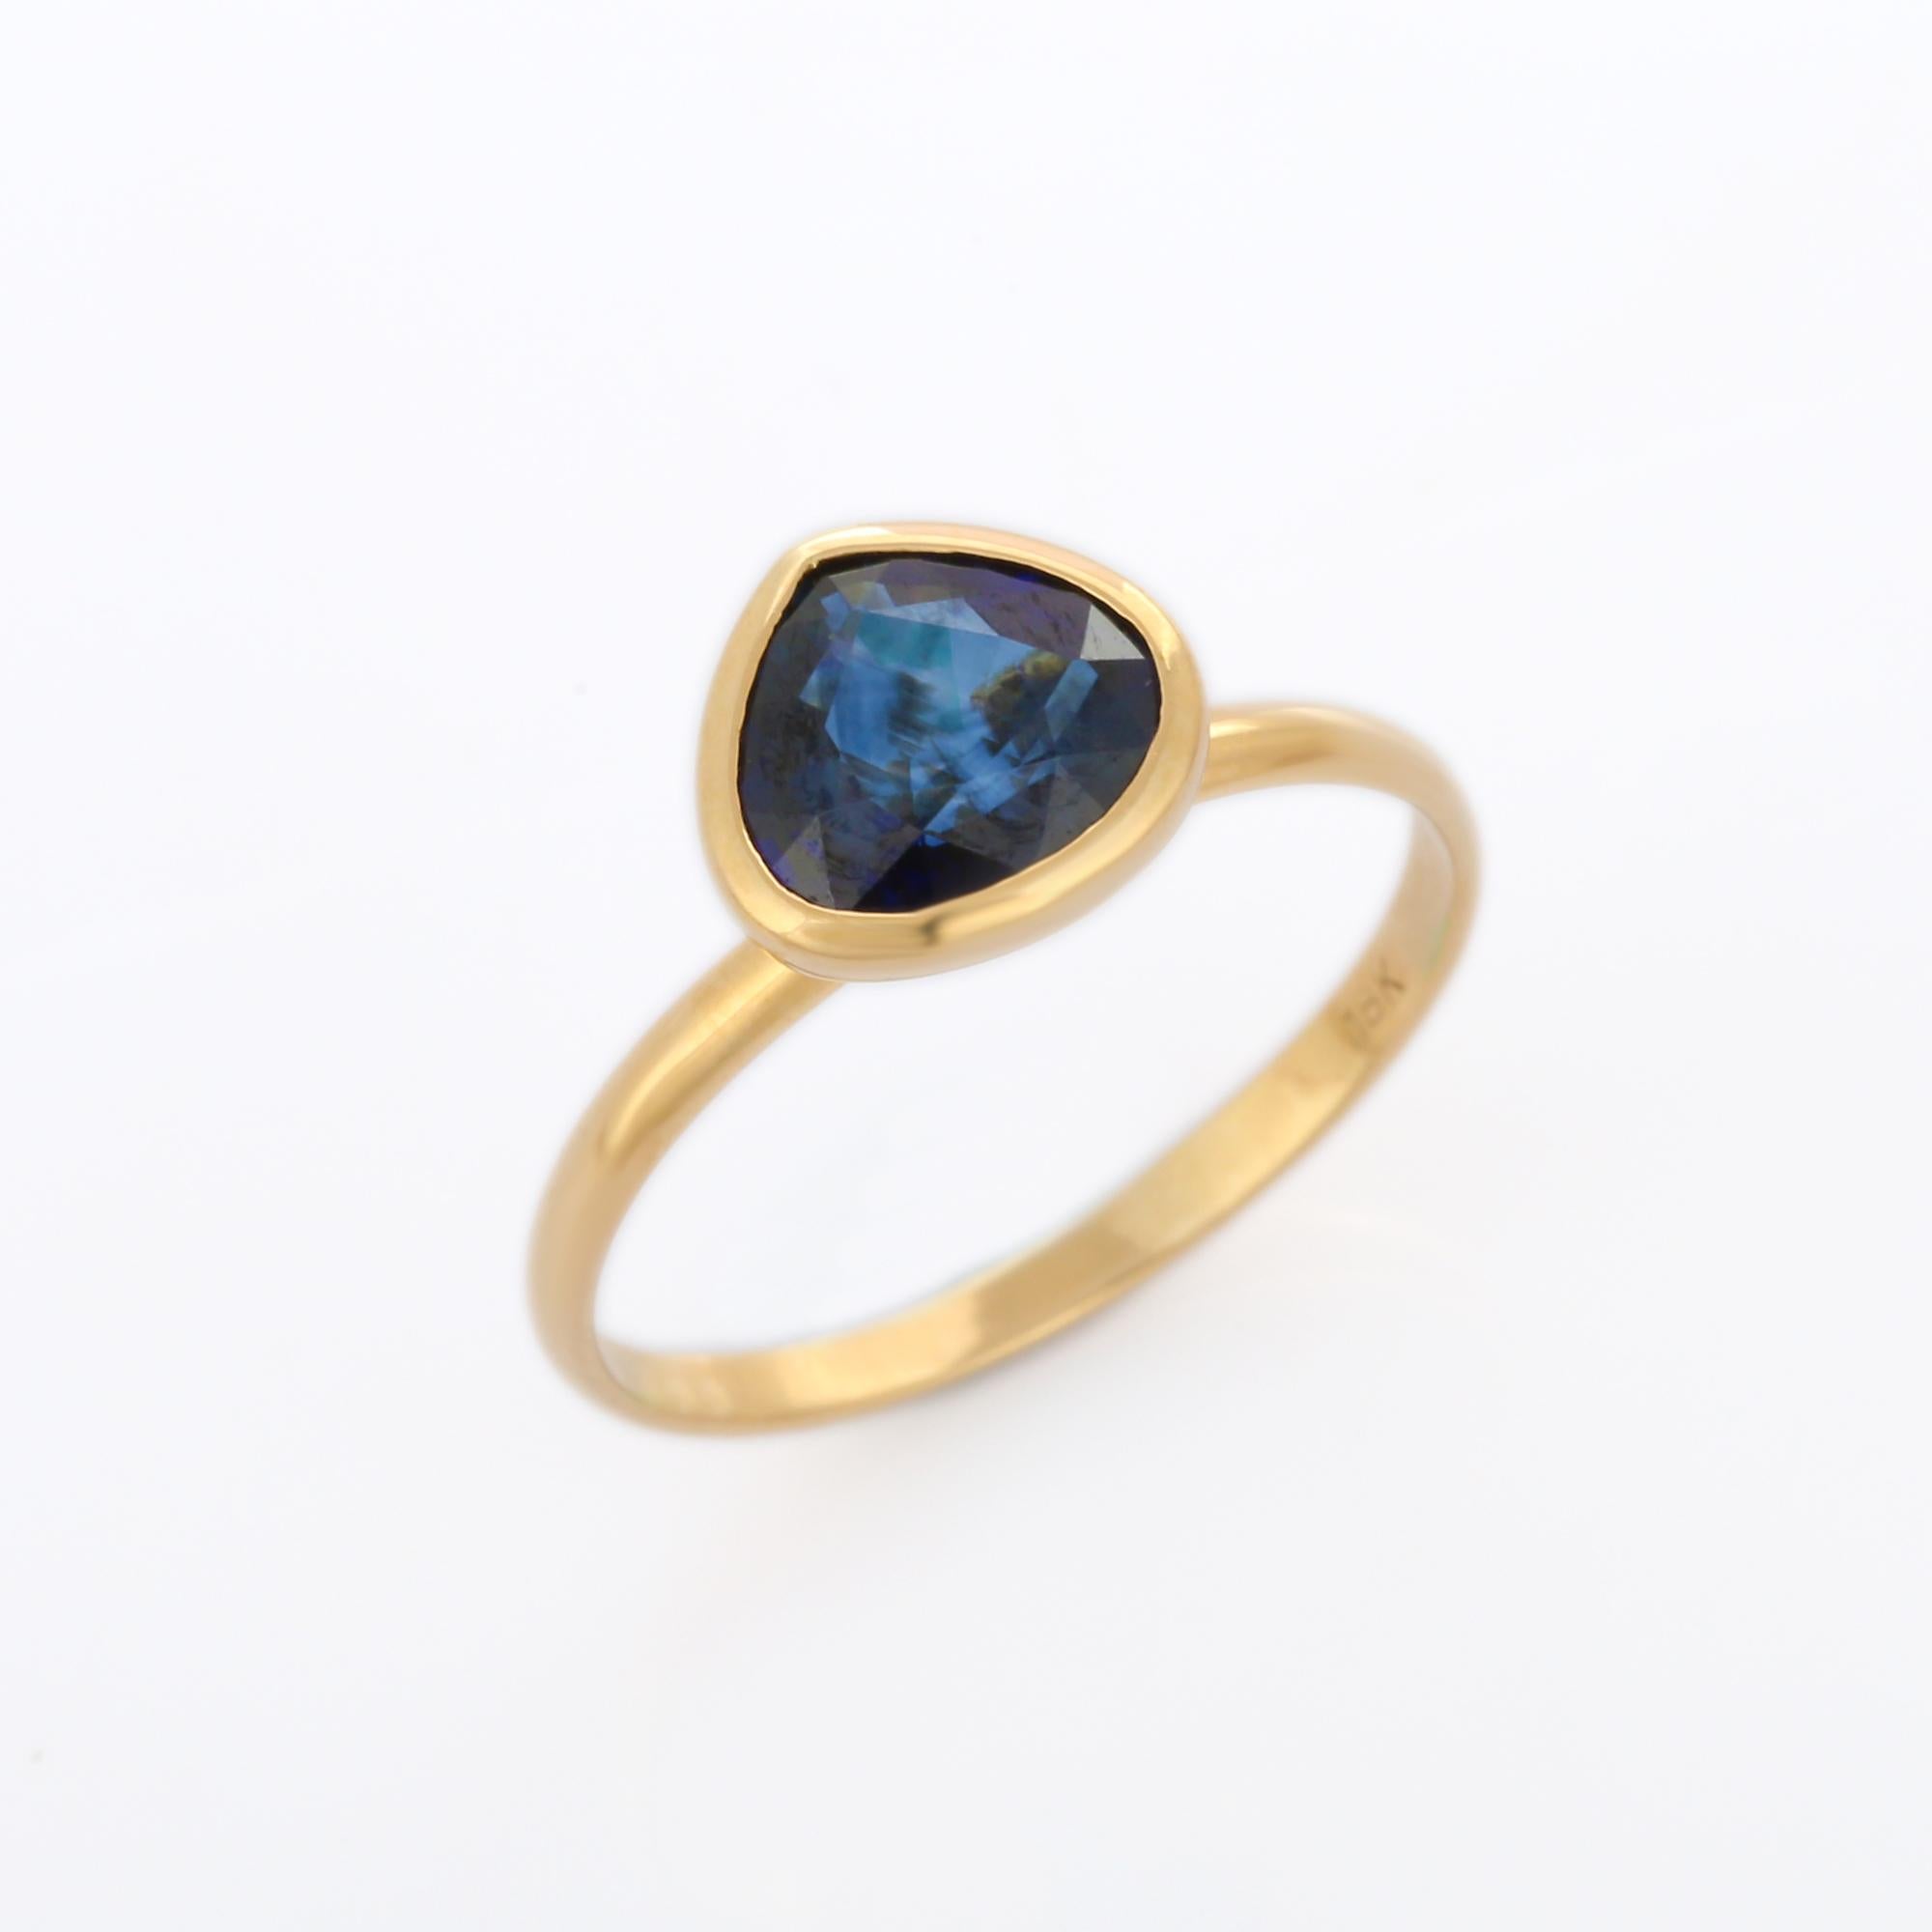 For Sale:  1.66 ct Bezel Set Pear Cut Blue Sapphire Gemstone 18K Yellow Gold Solitaire Ring 2